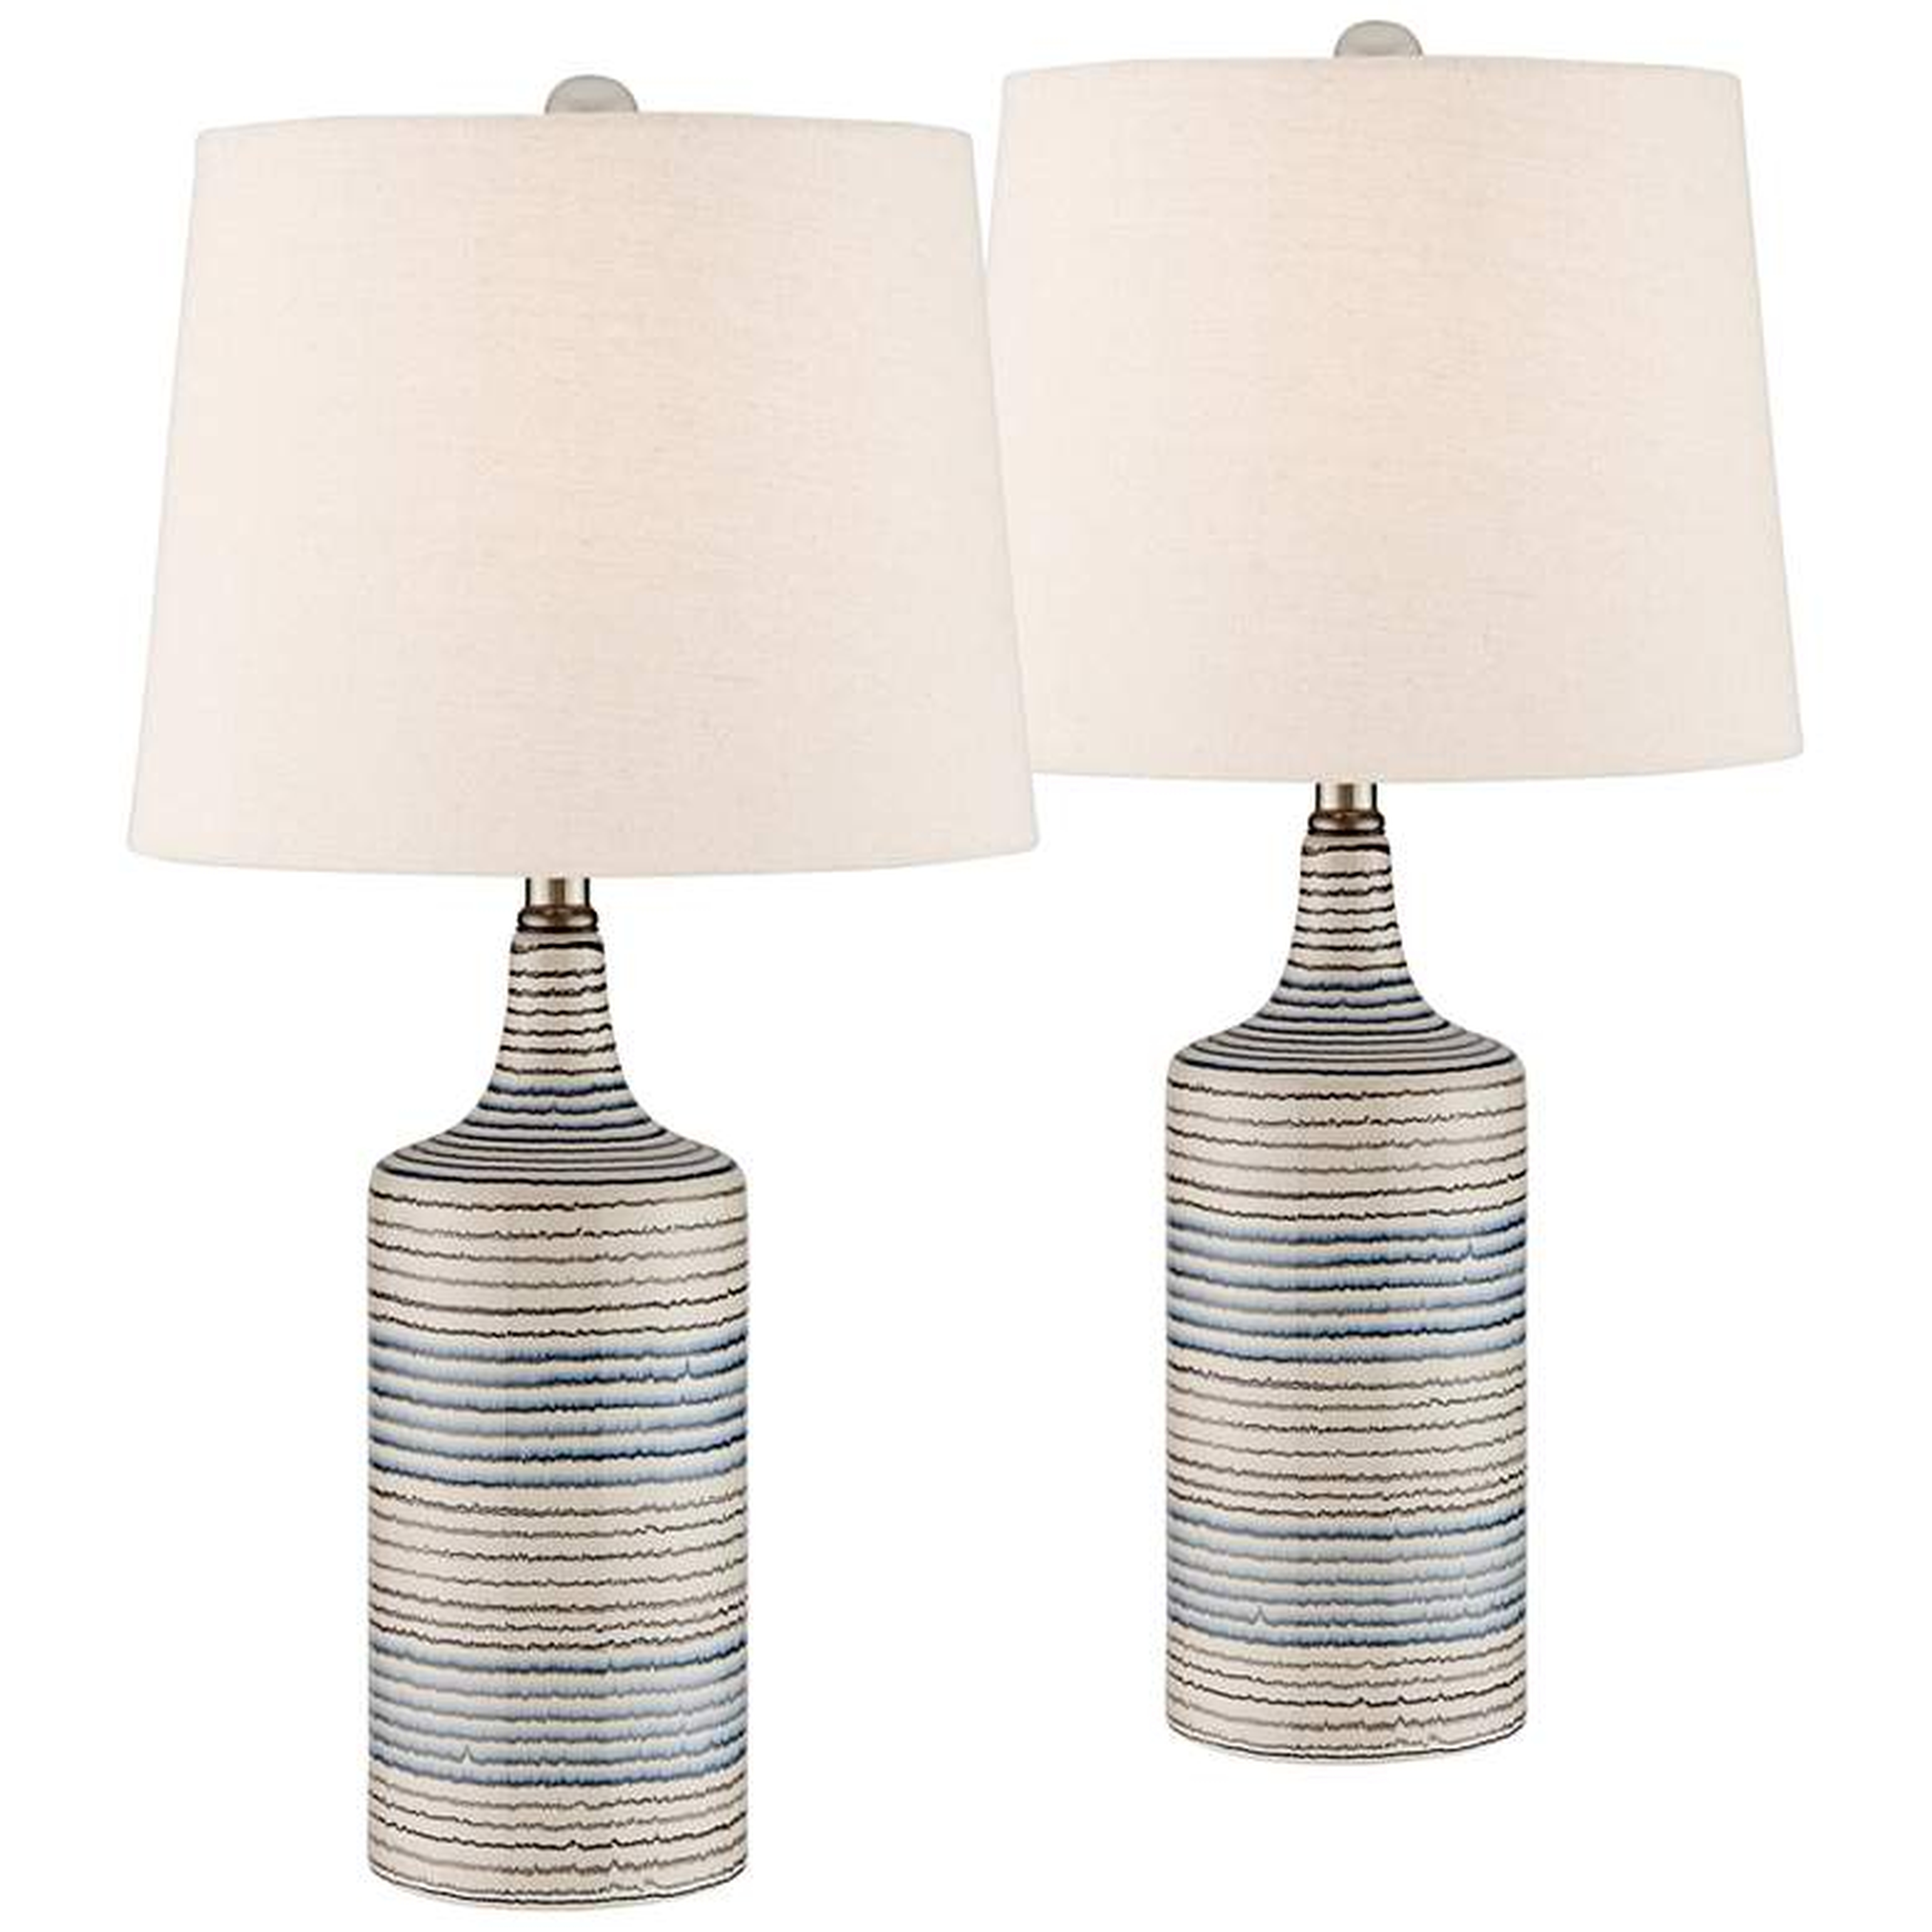 Lite Source Felicia White and Blue Ceramic Accent Table Lamps Set of 2 - Lamps Plus